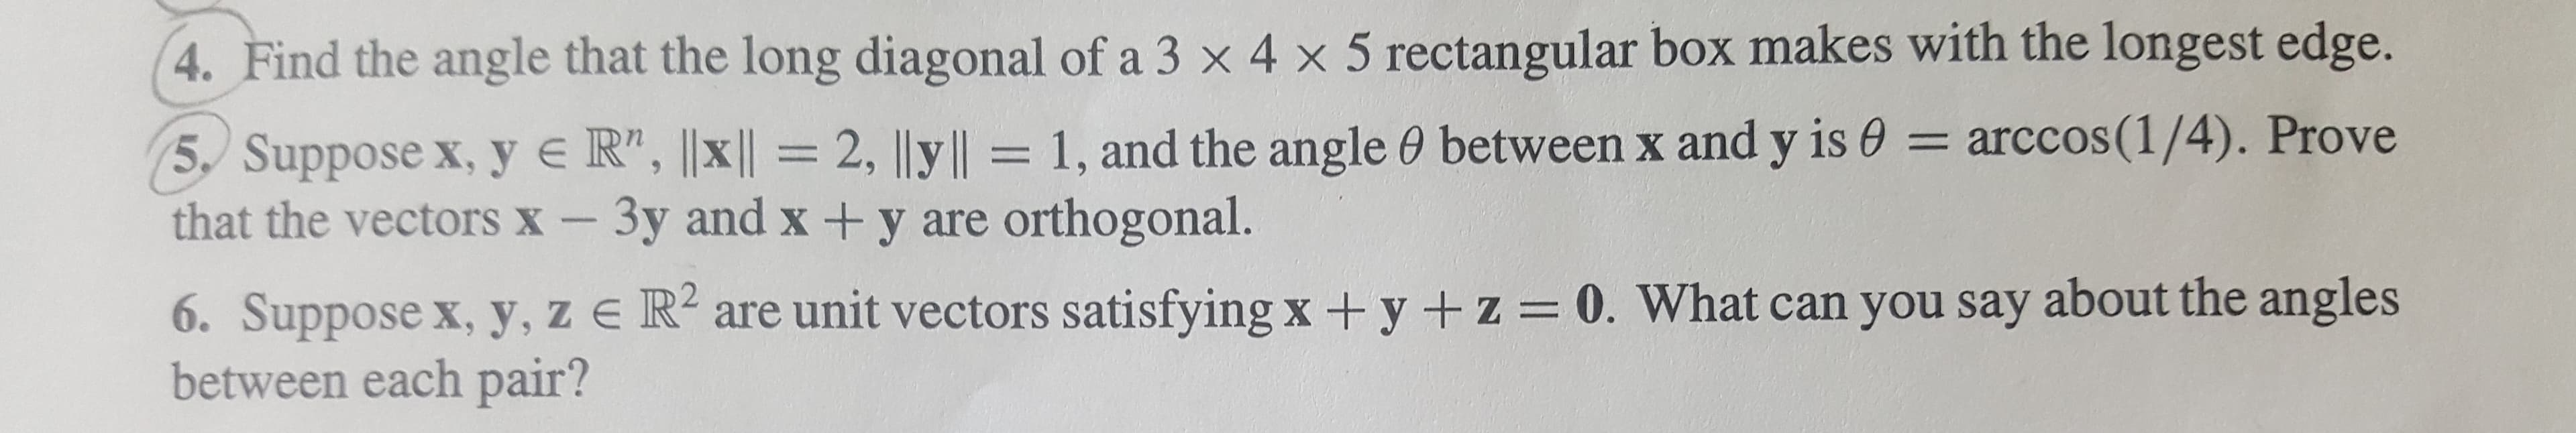 4. Find the angle that the long diagonal of a 3 x 4 x 5 rectangular box makes with the longest edge.
= arccos(1/4). Prove
5, Suppose x, y e R", ||x ||= 2, |ly||= 1, and the angle 0 between x and y is e
that the vectors X - 3y and x + y are orthogonal.
6. Suppose x, y, z e R are unit vectors satisfying x + y + z = 0. What can you say about the angles
between each pair?
